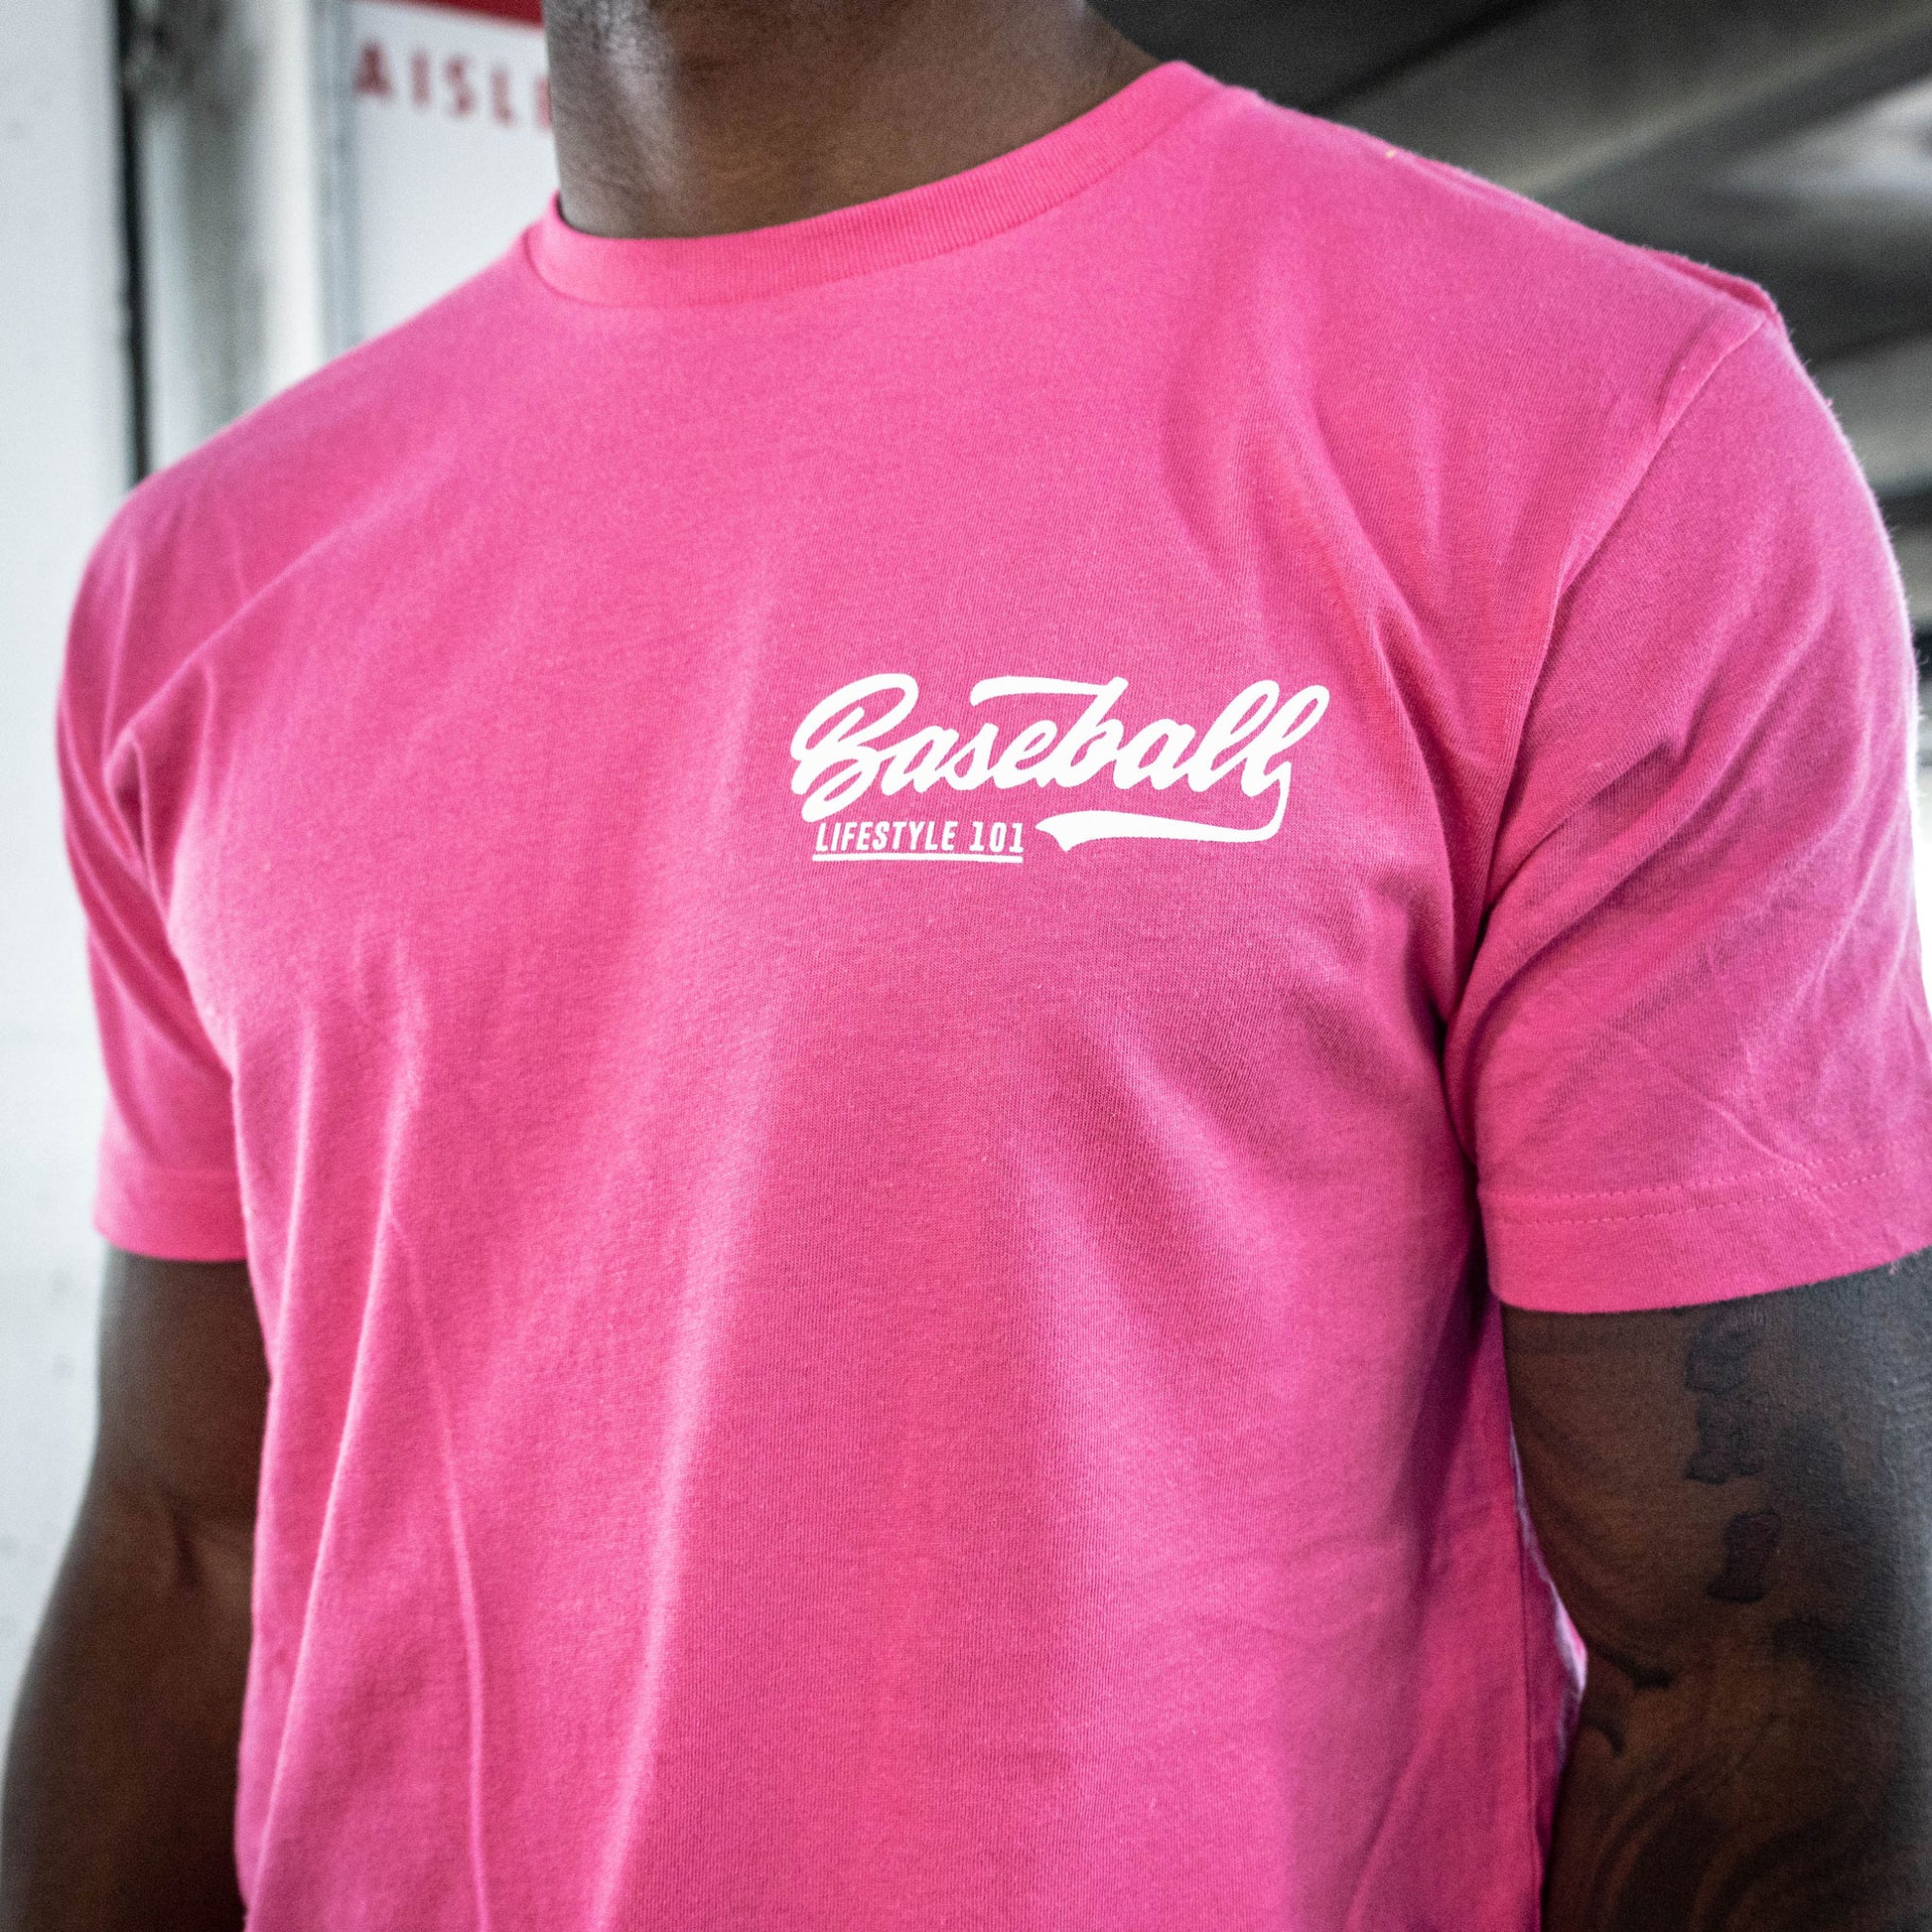 Sale Build Pink Baseball Authentic White Throwback Shirt Light